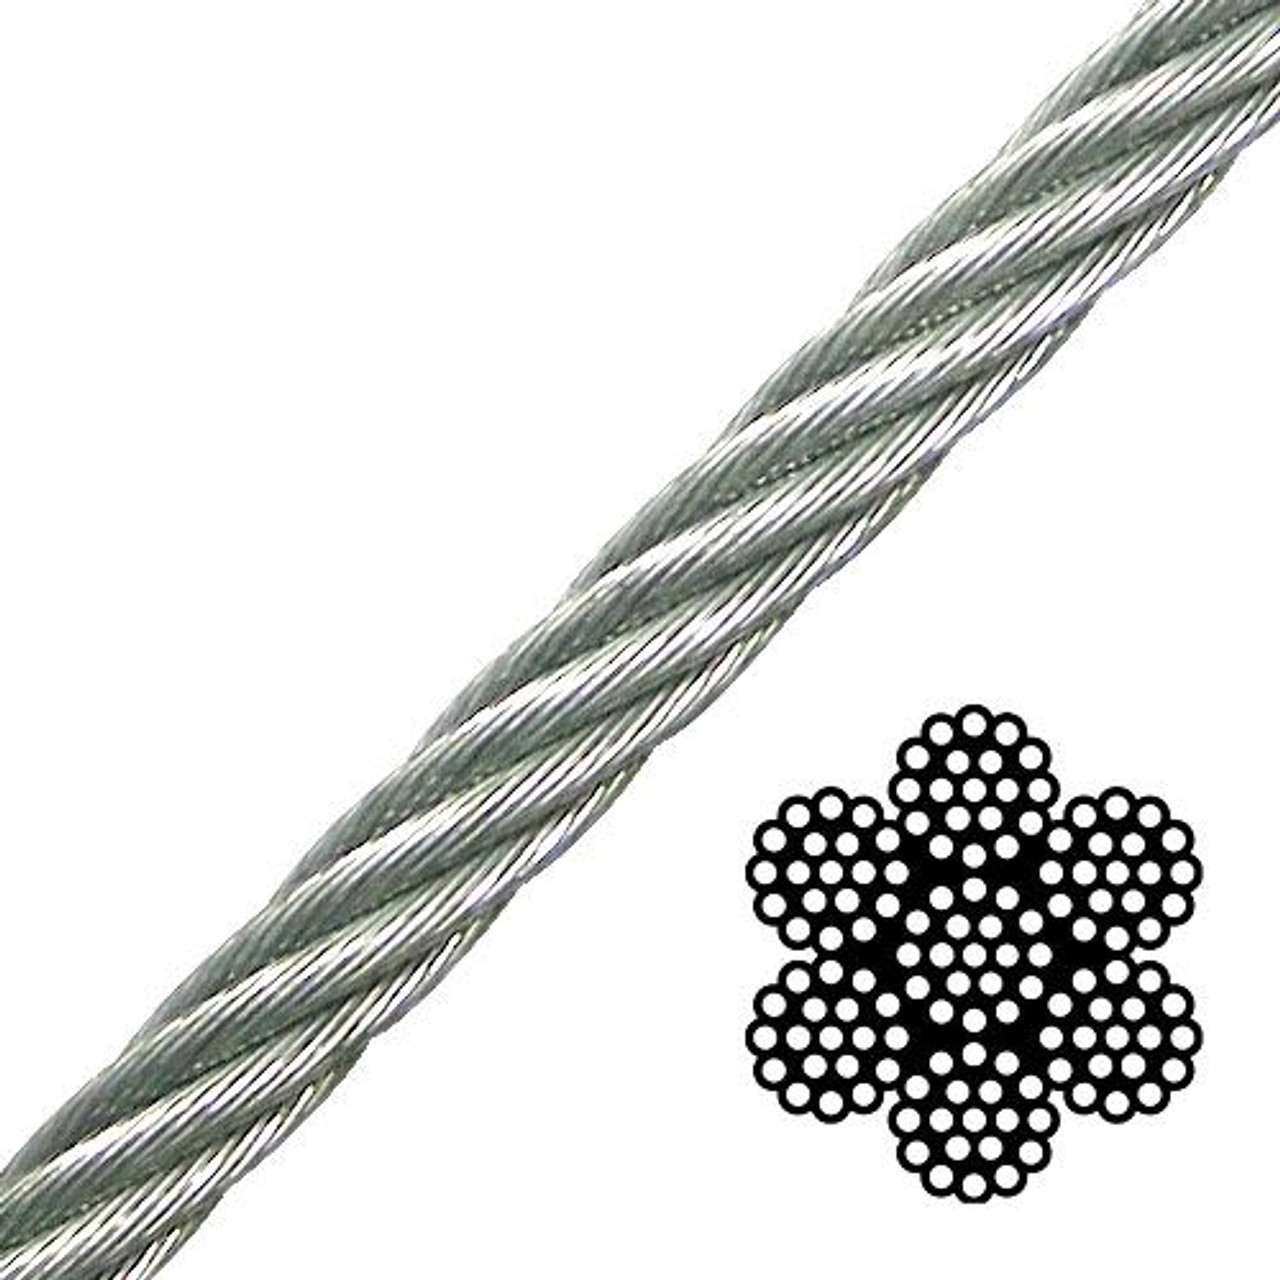 5/16 7x19 Galvanized Aircraft Cable - 9800 lbs Breaking Strength